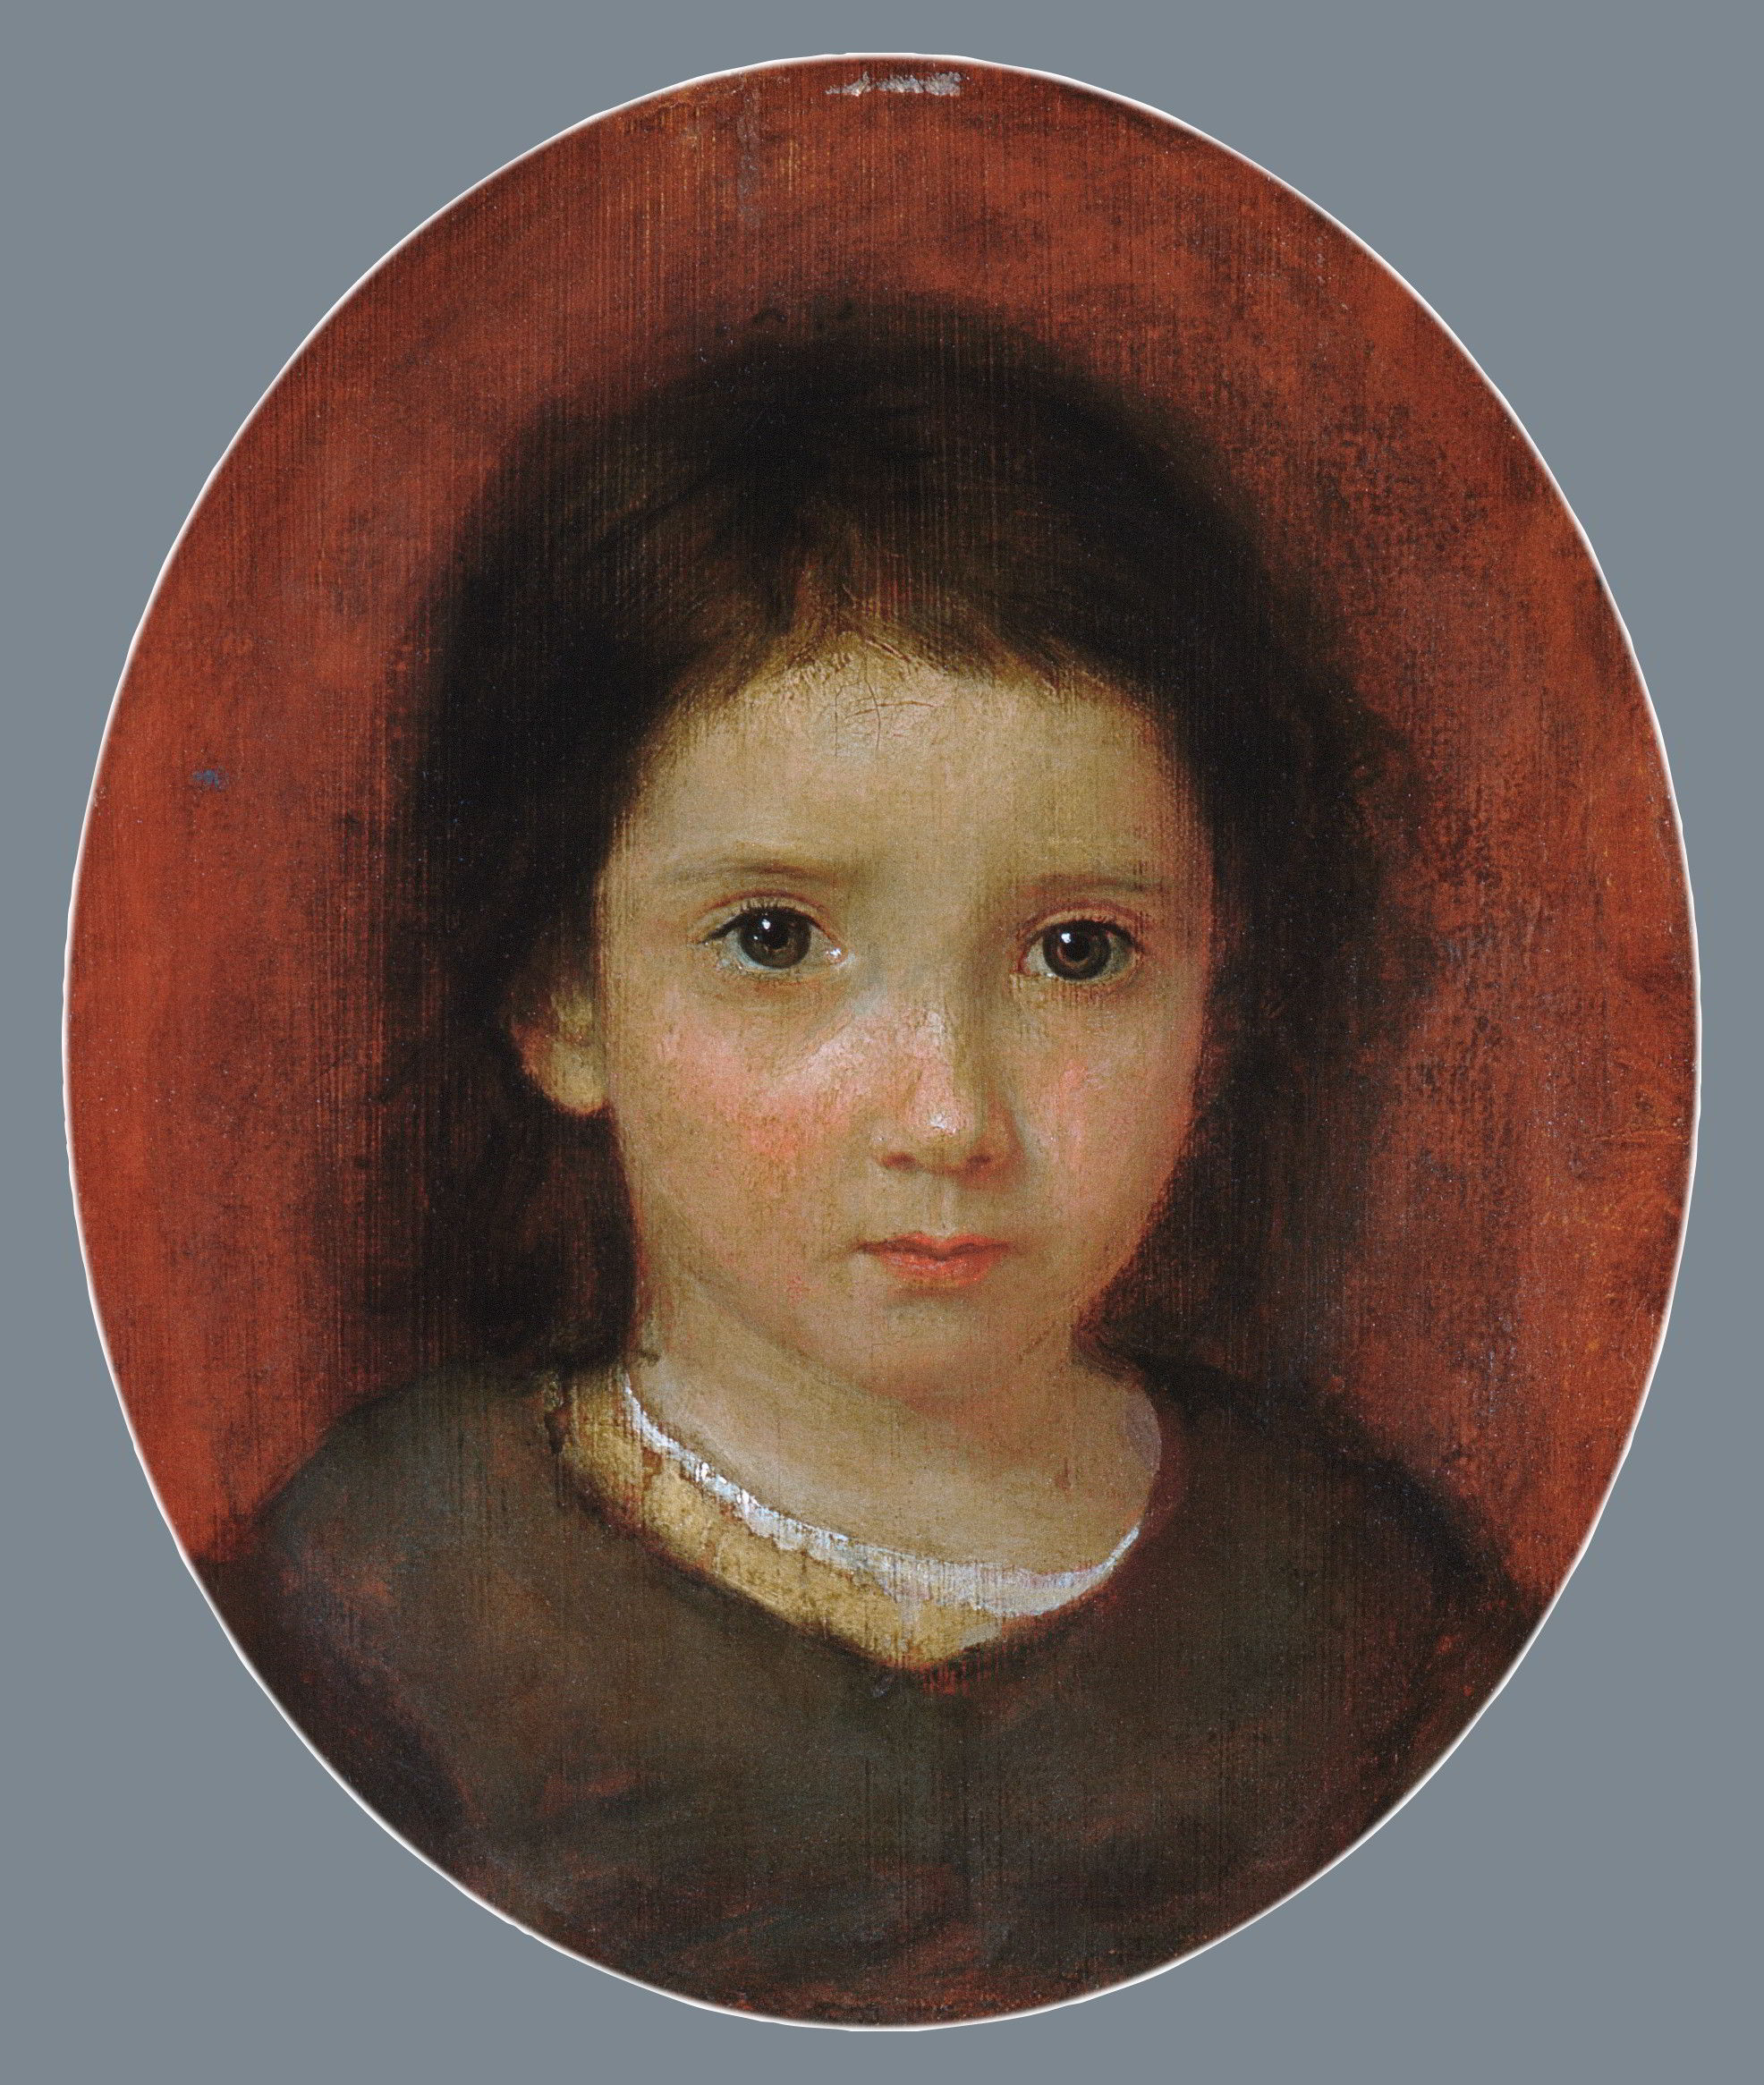 Daughter of William Page (possibly Anne Page) by William Page